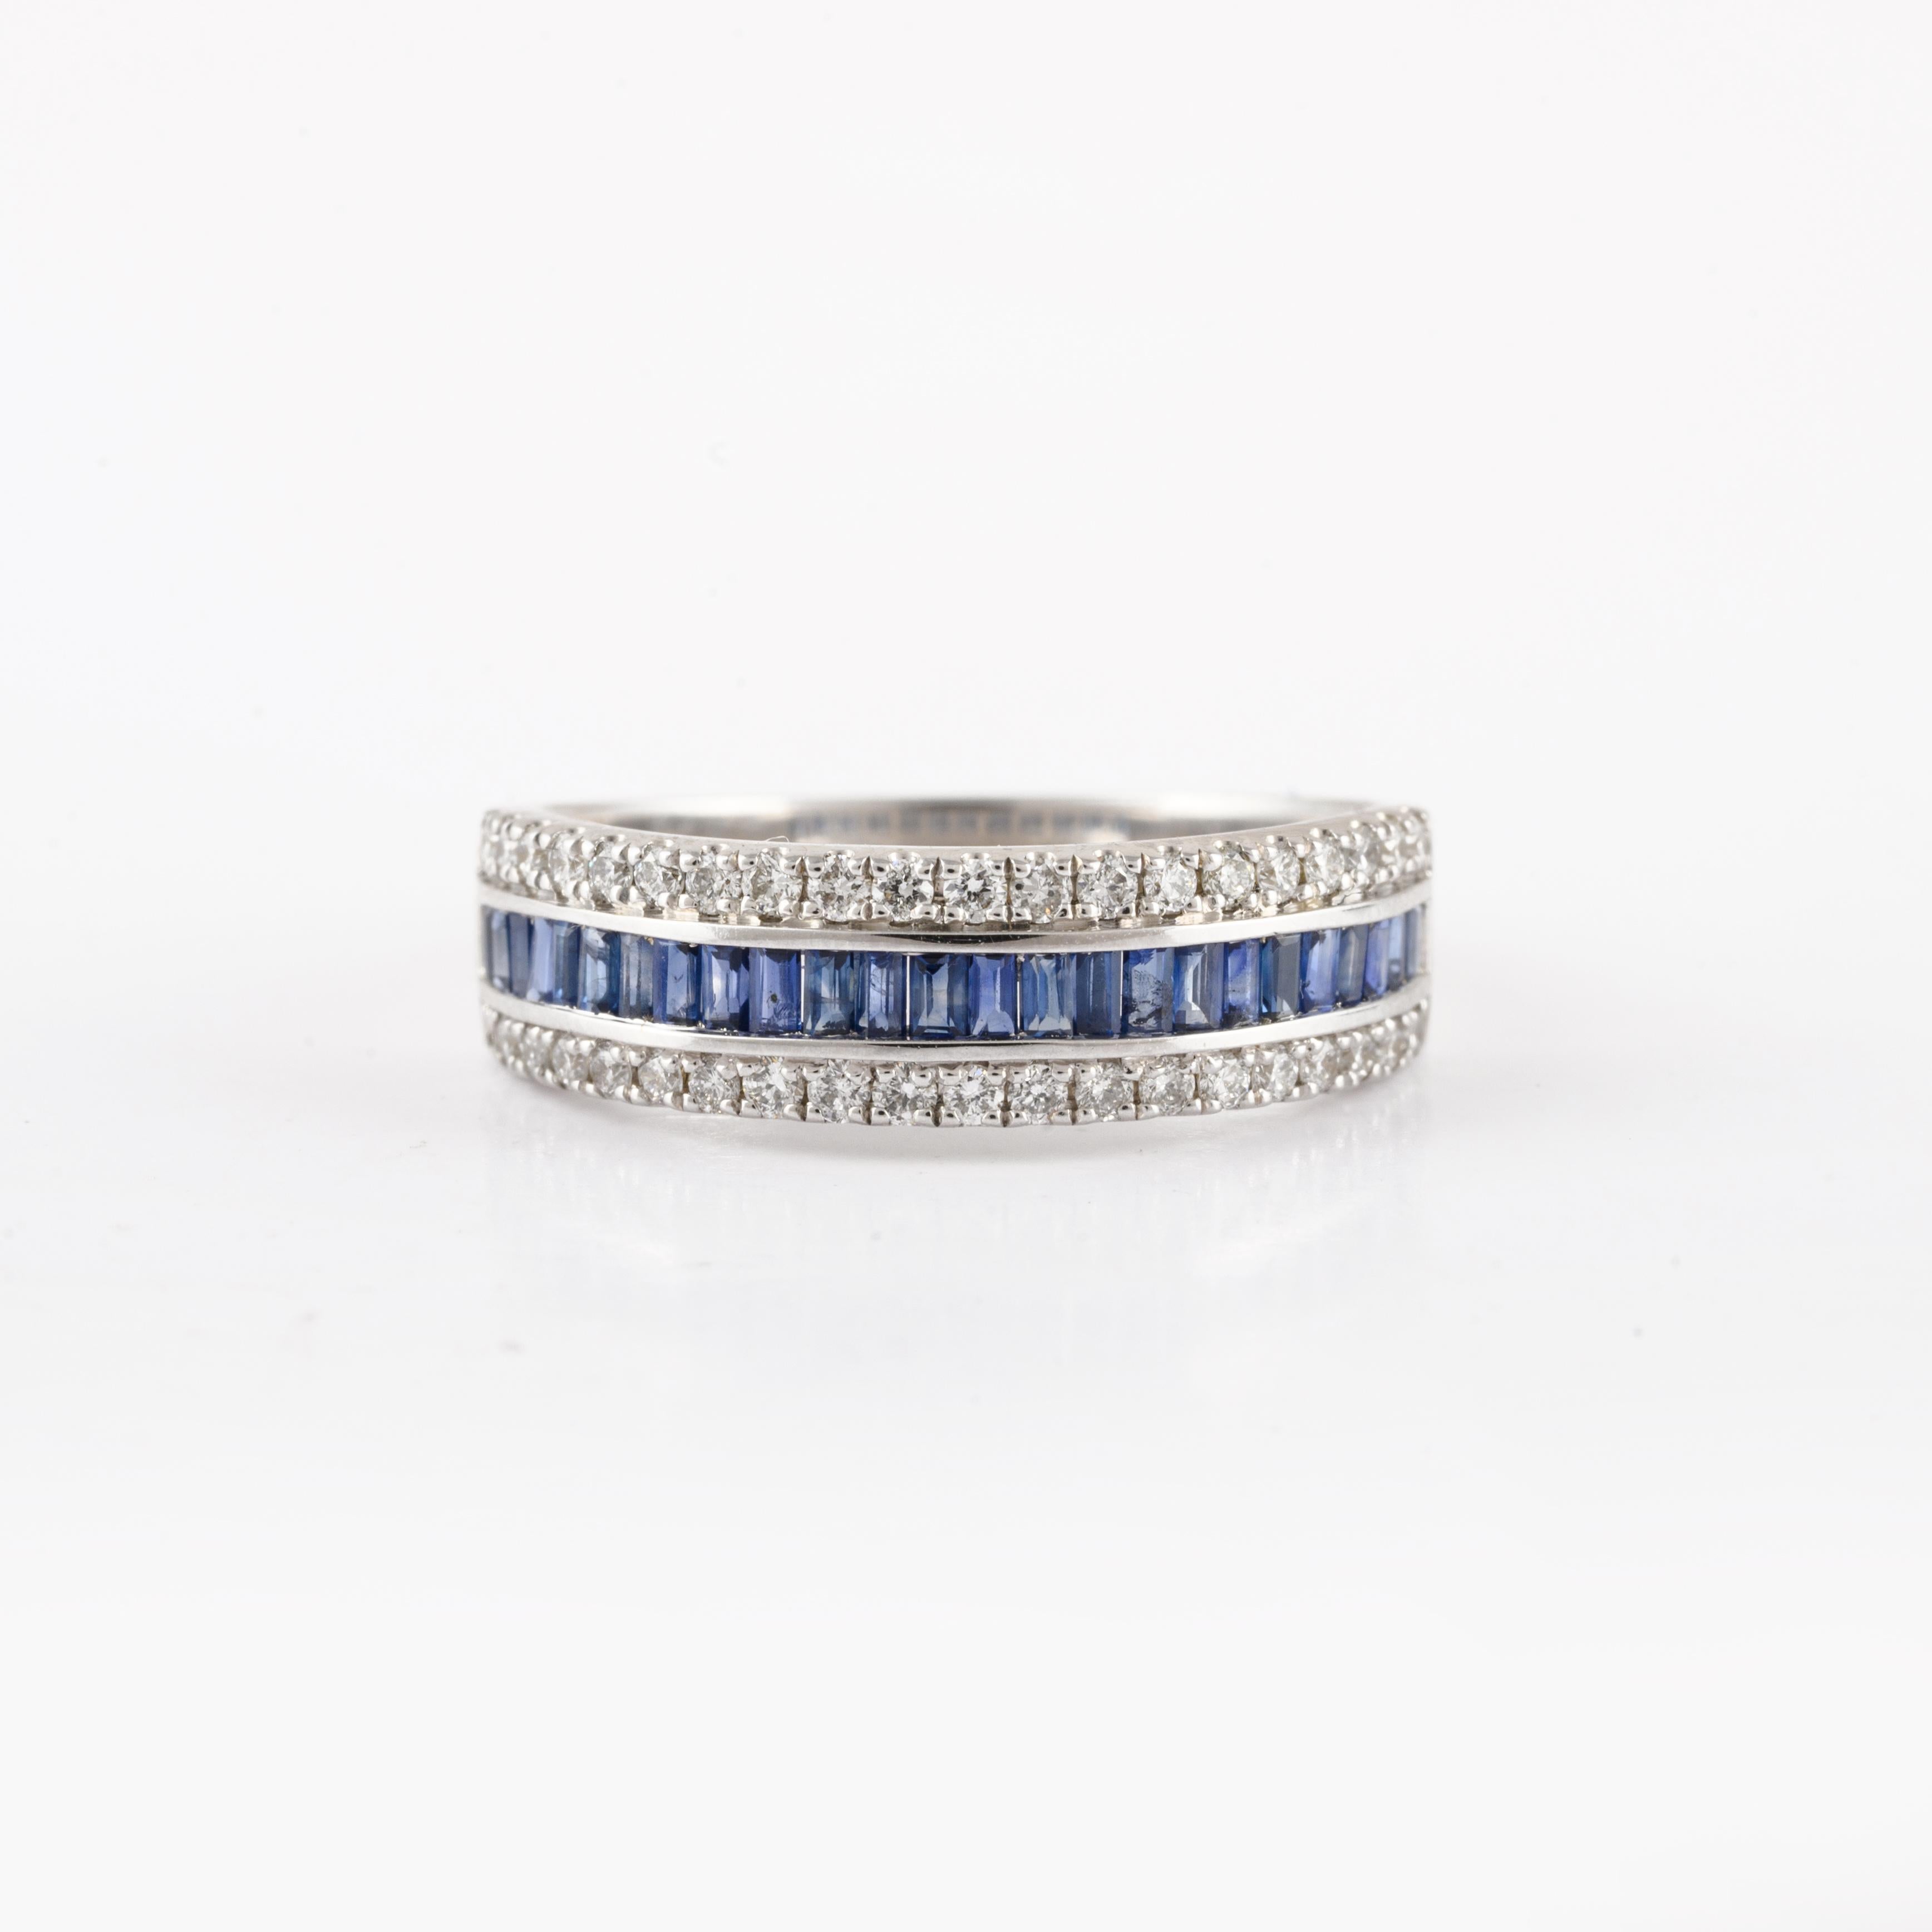 For Sale:  Natural Blue Sapphire Diamond Wedding Ring Crafted in 18k Solid White Gold 6